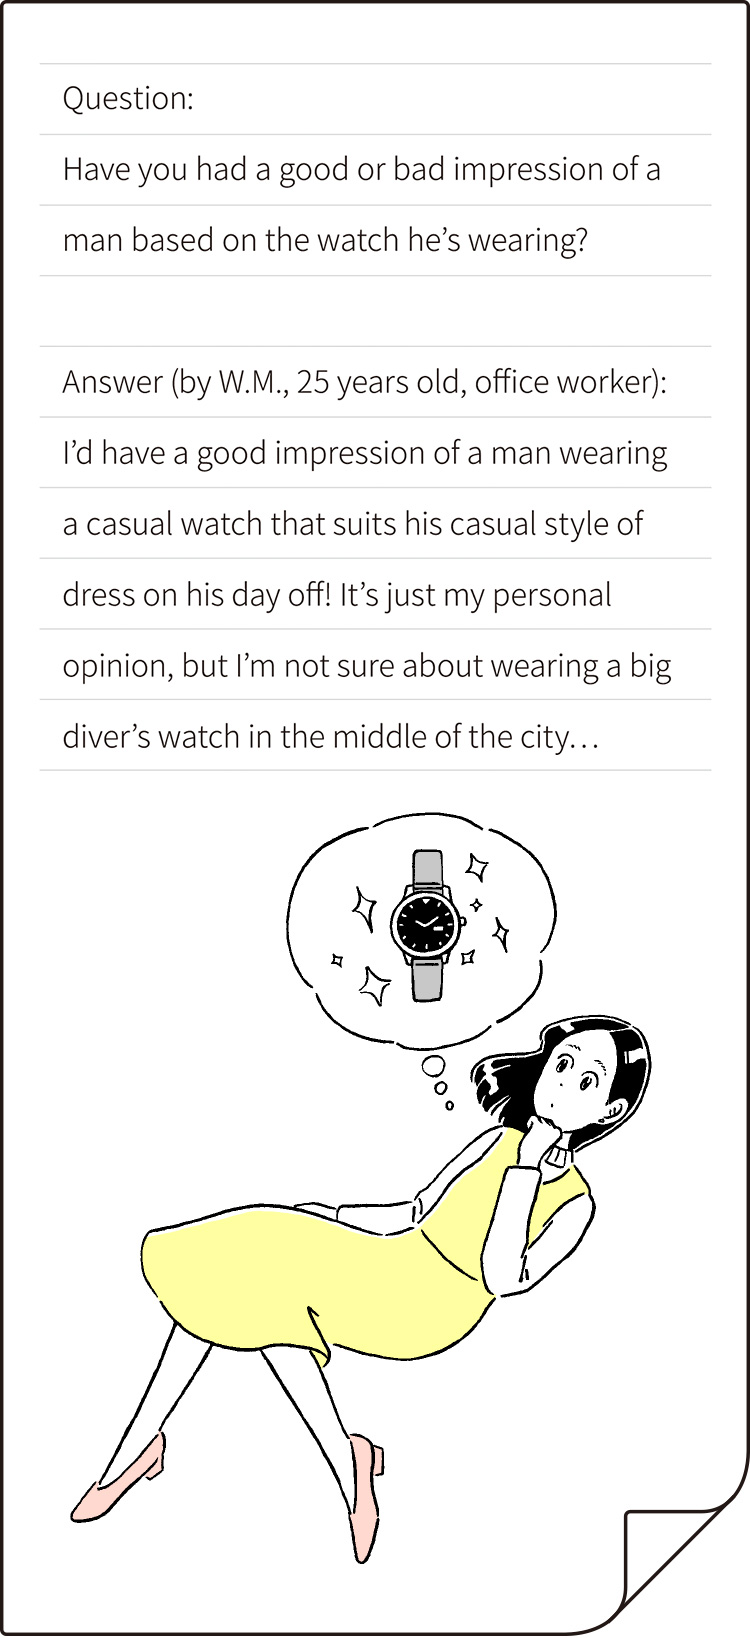 "Question: Have you ever had a good or bad impression of a man by the watch he's wearing? Answer (by W.M., 25 years old, office worker): I’d have a good impression of a man wearing a casual watch that suits his casual style of dress on his day off!
It’s just my personal opinion, but I’m not sure about wearing a big diver’s watch in the middle of the city…"